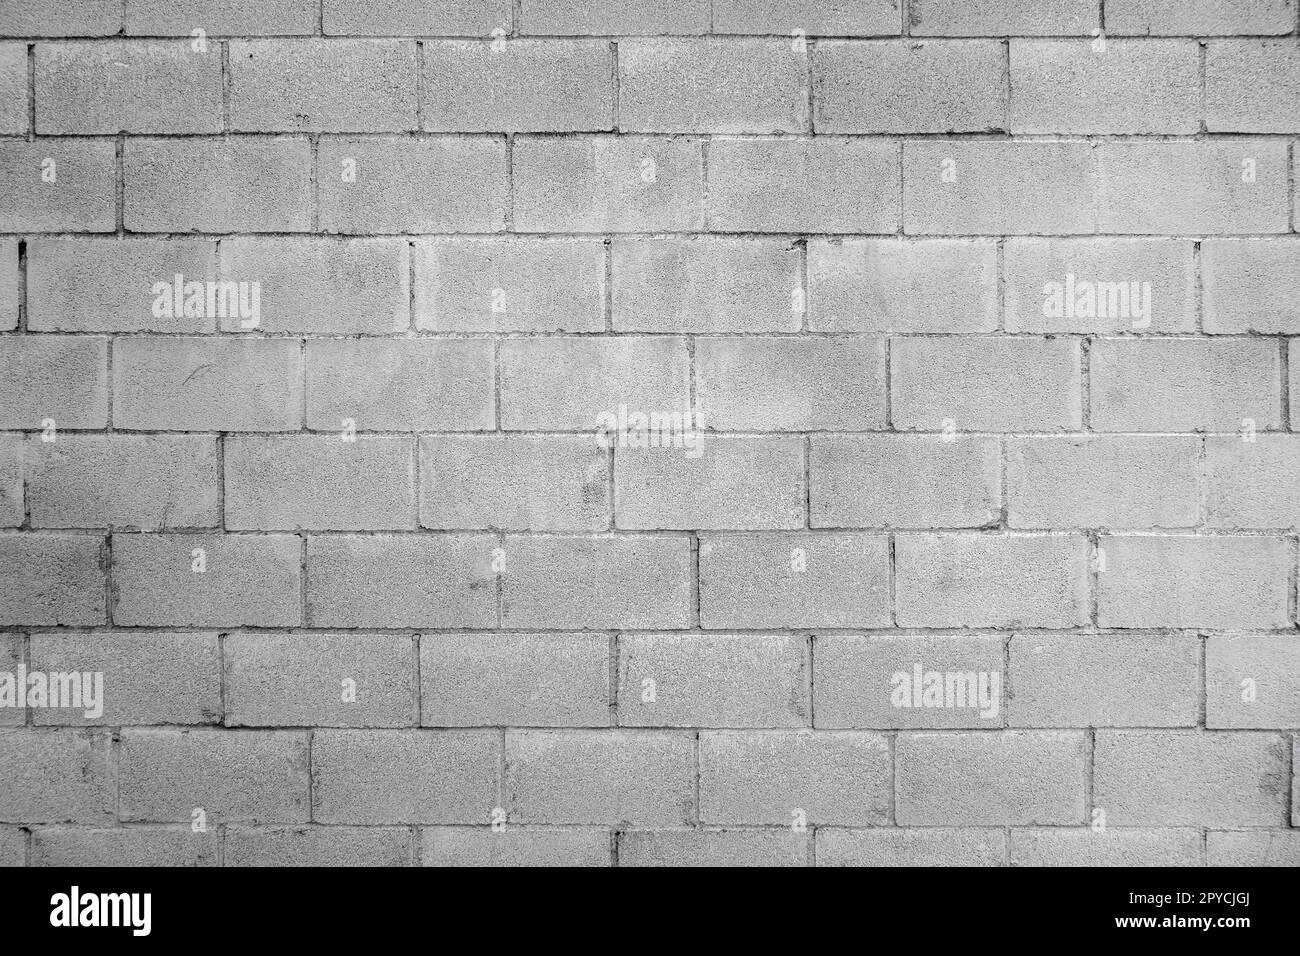 Cinder block wall background texture Stock Photo